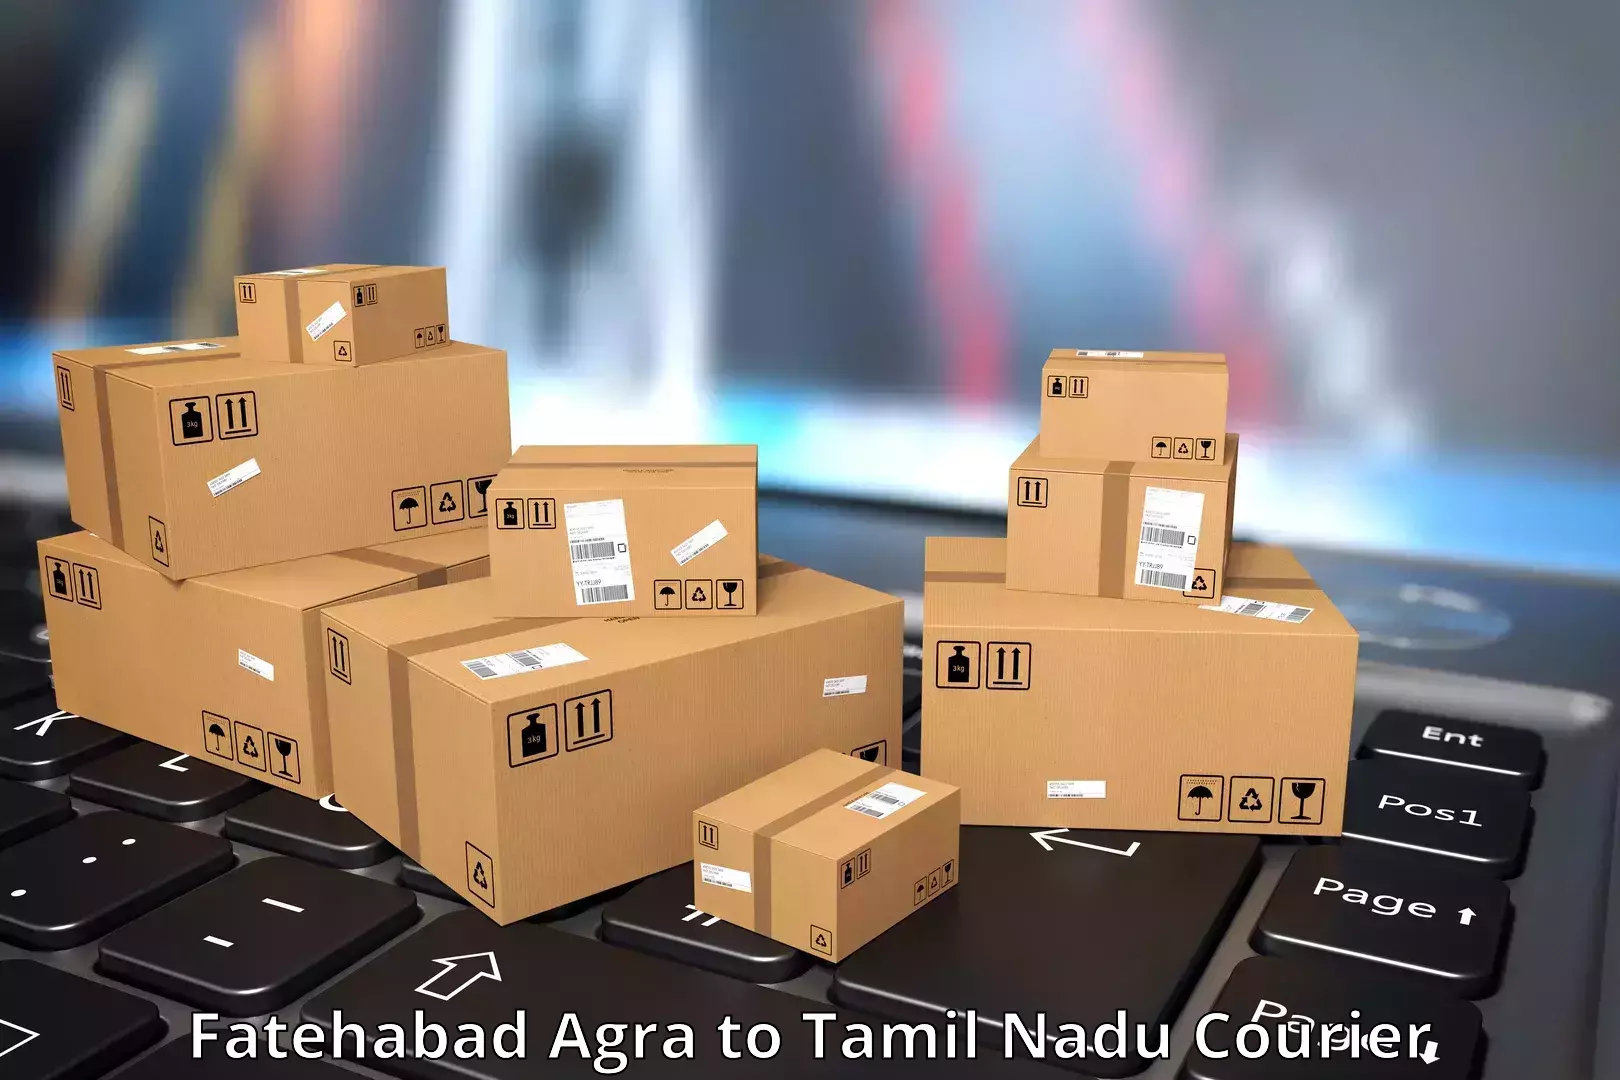 Quality courier partnerships Fatehabad Agra to Kovilpatti